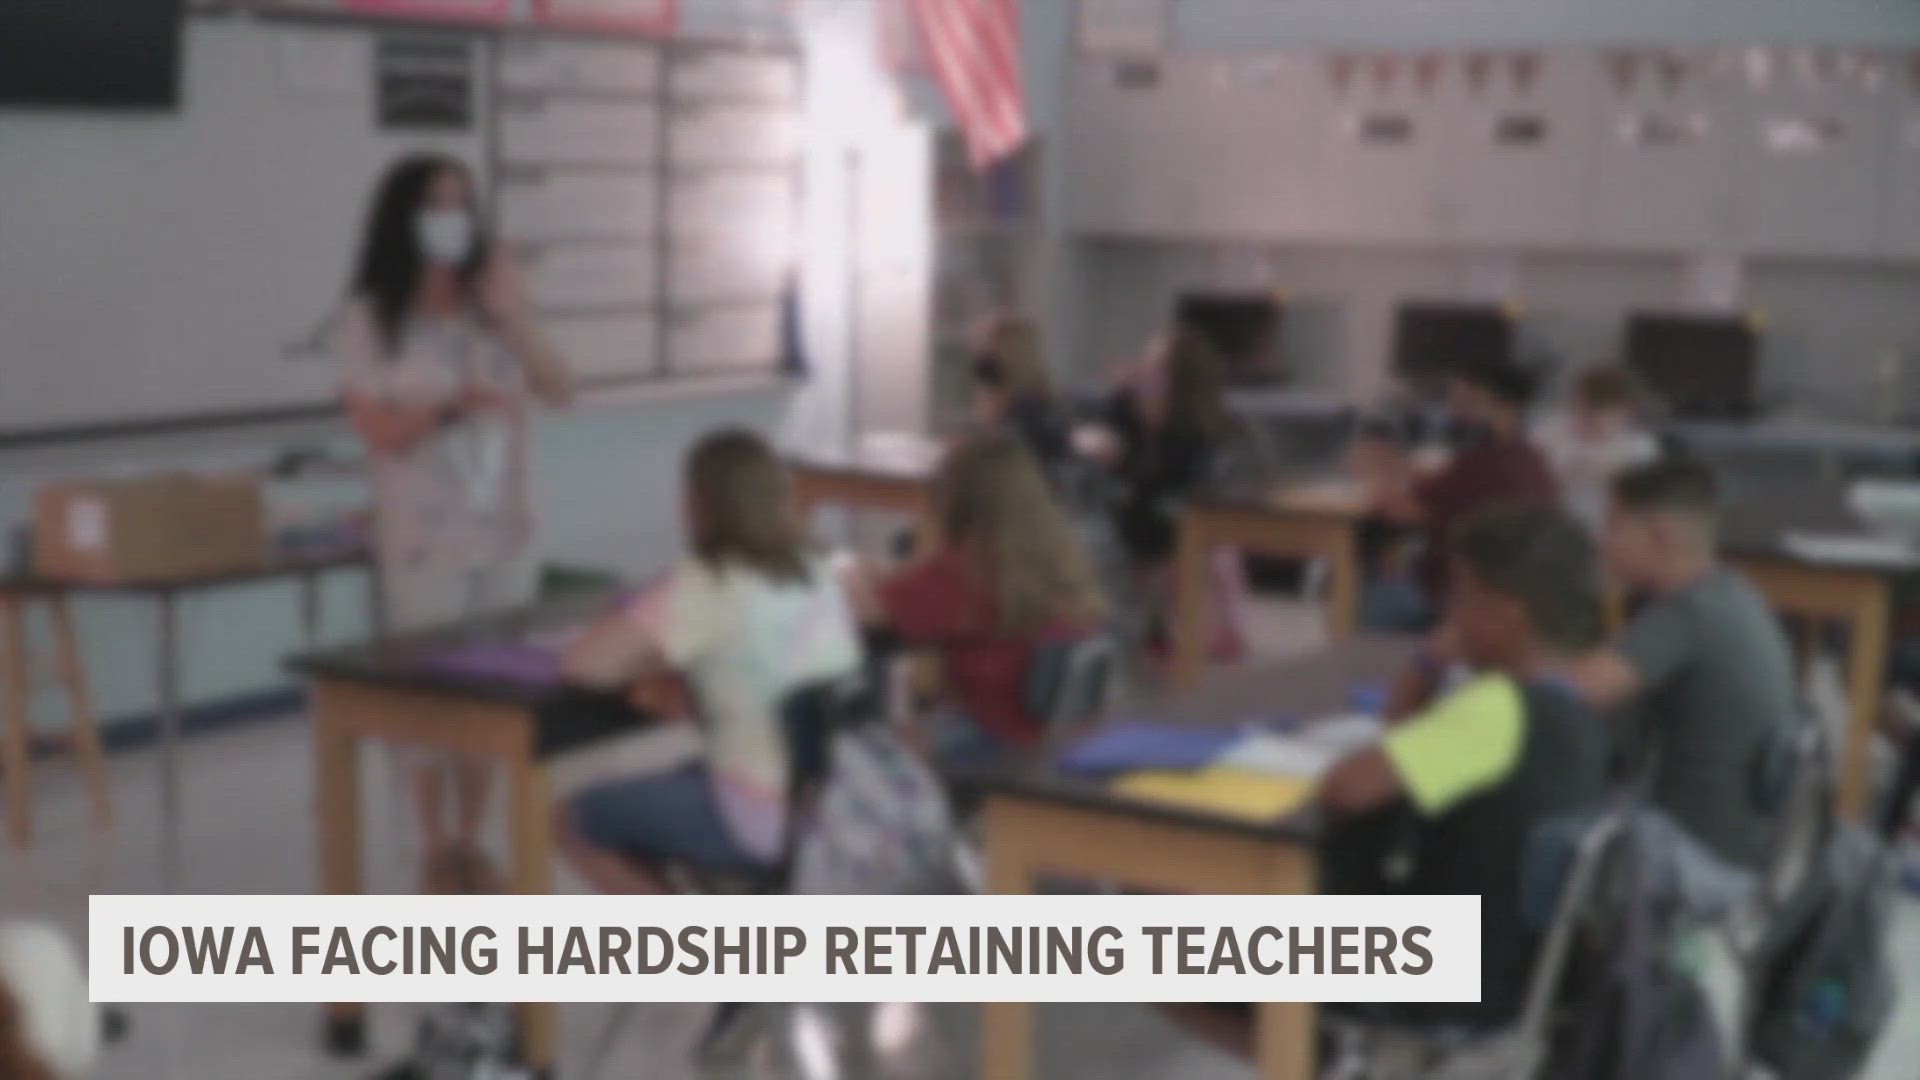 Many classrooms across the state are missing a key component: teachers.